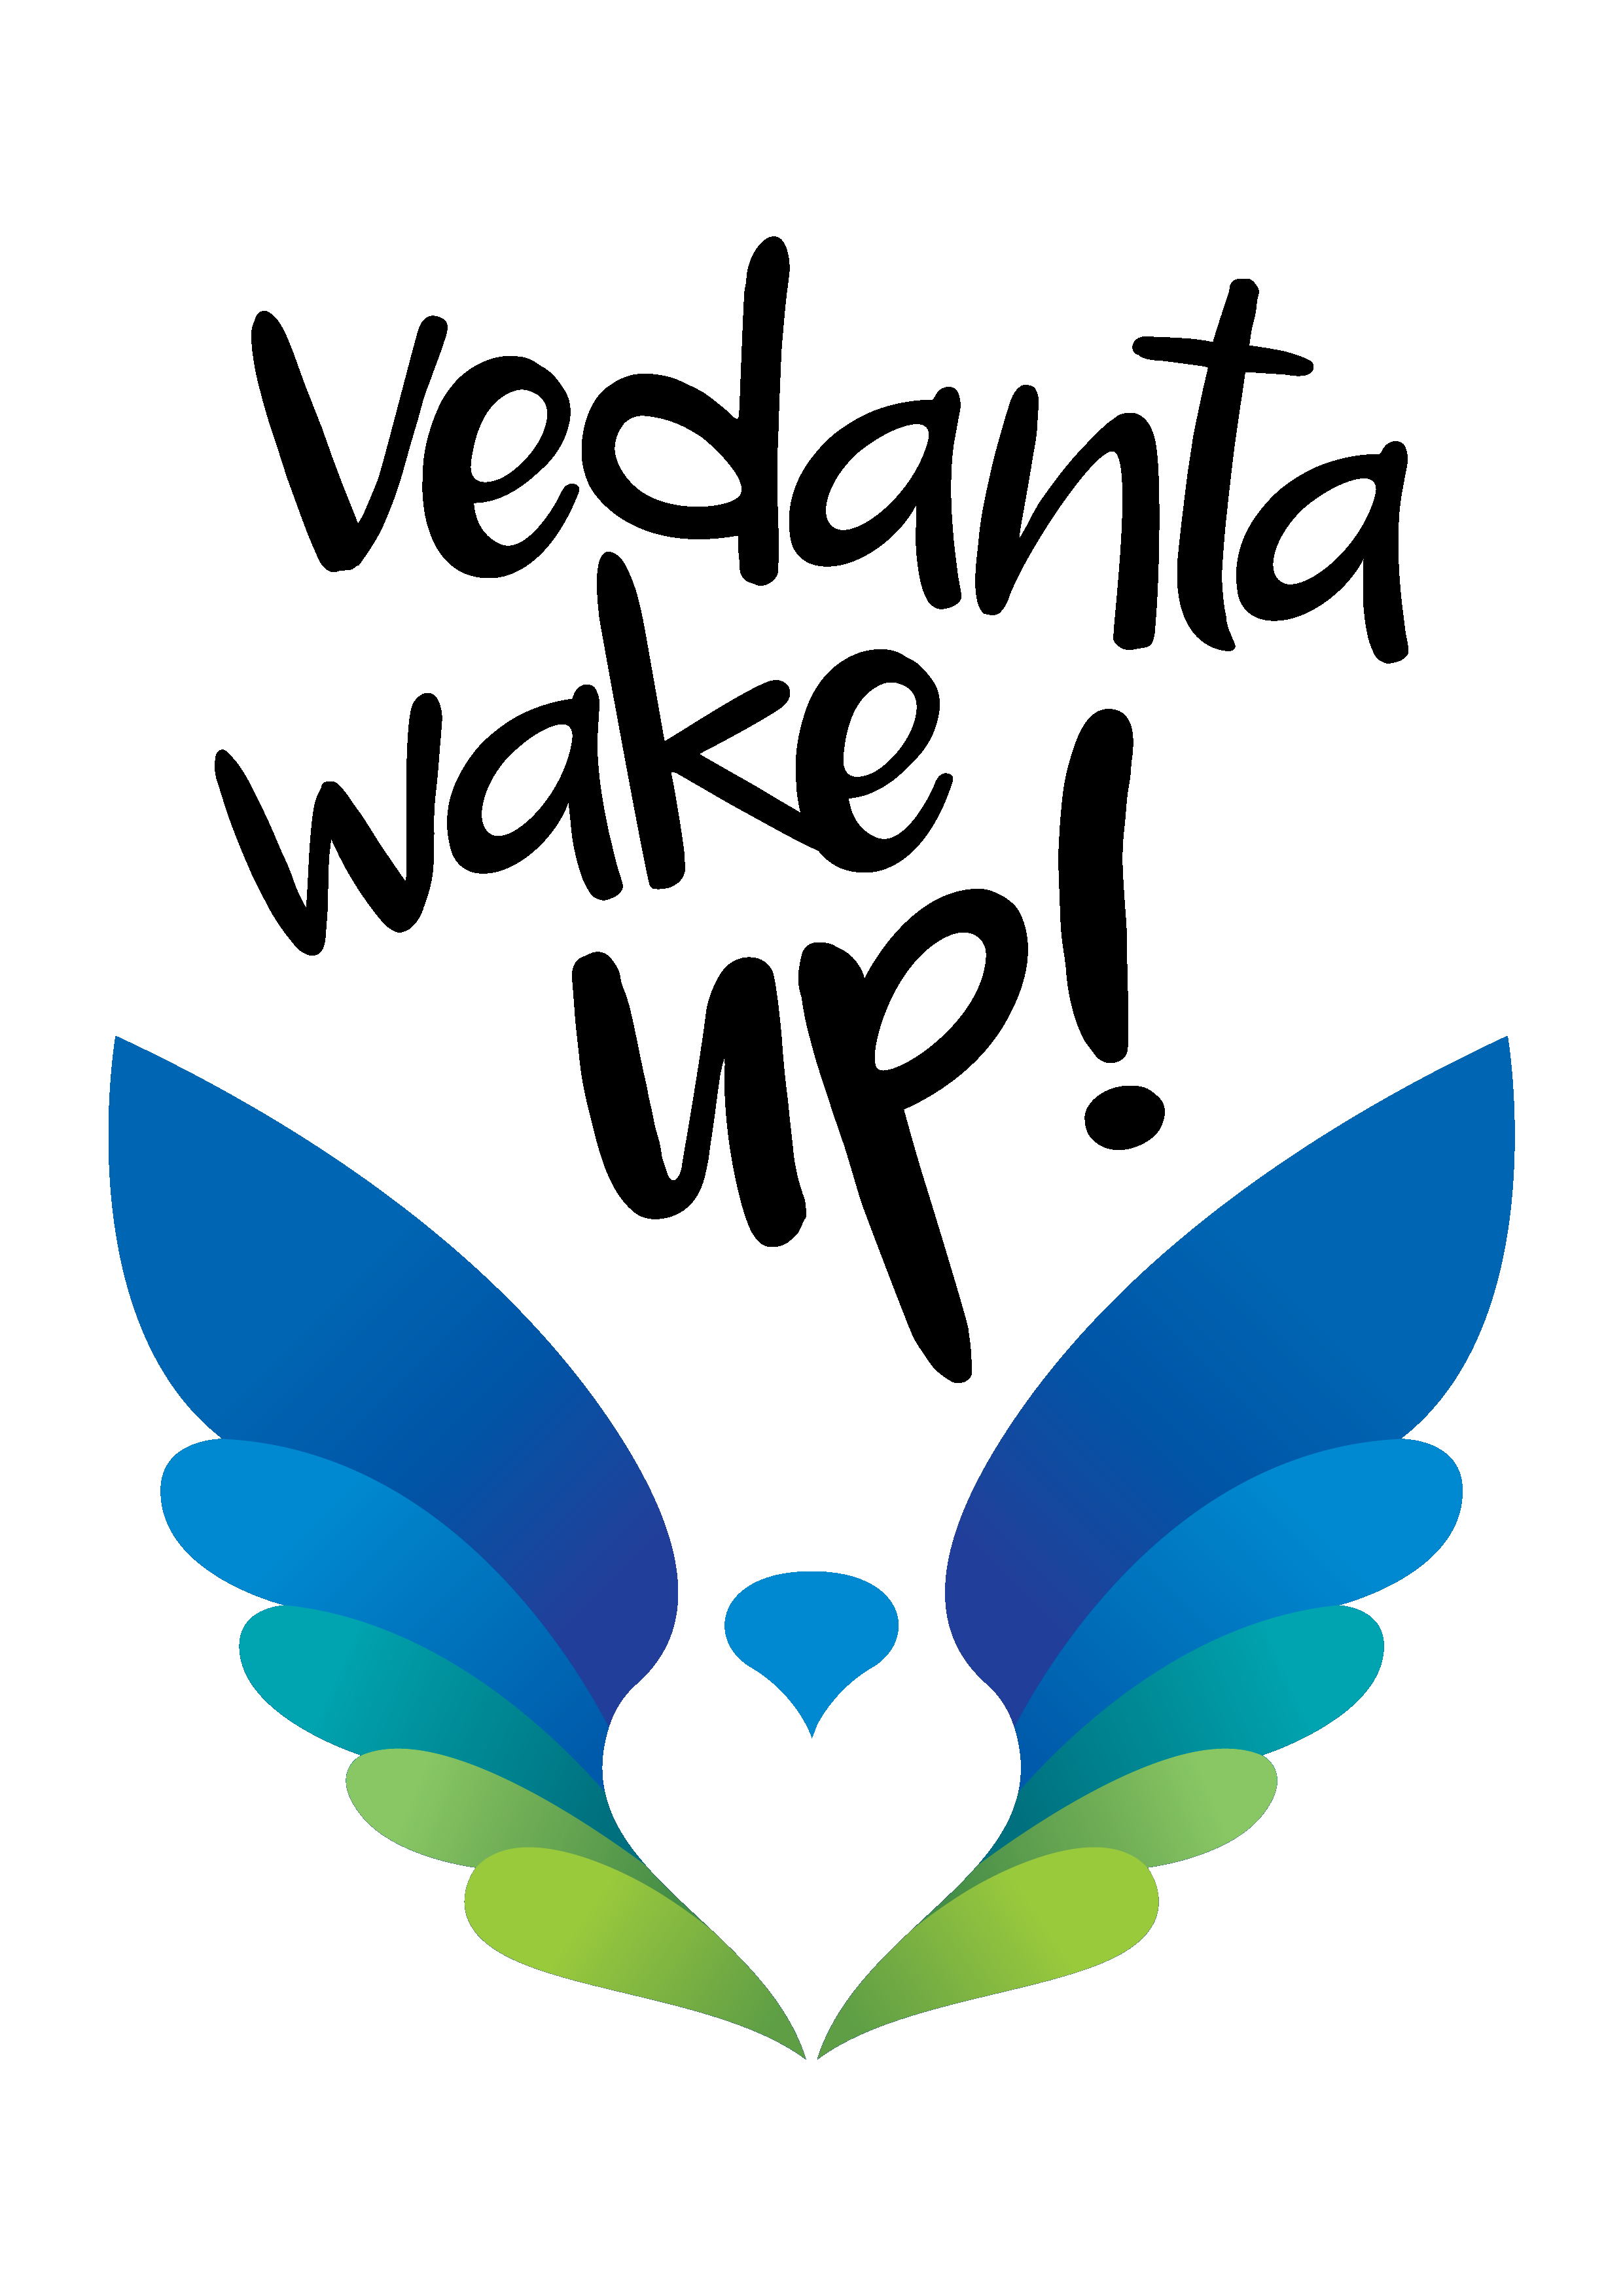 vedantawakeup Book 6 Nights and Pay only for 4 Nights